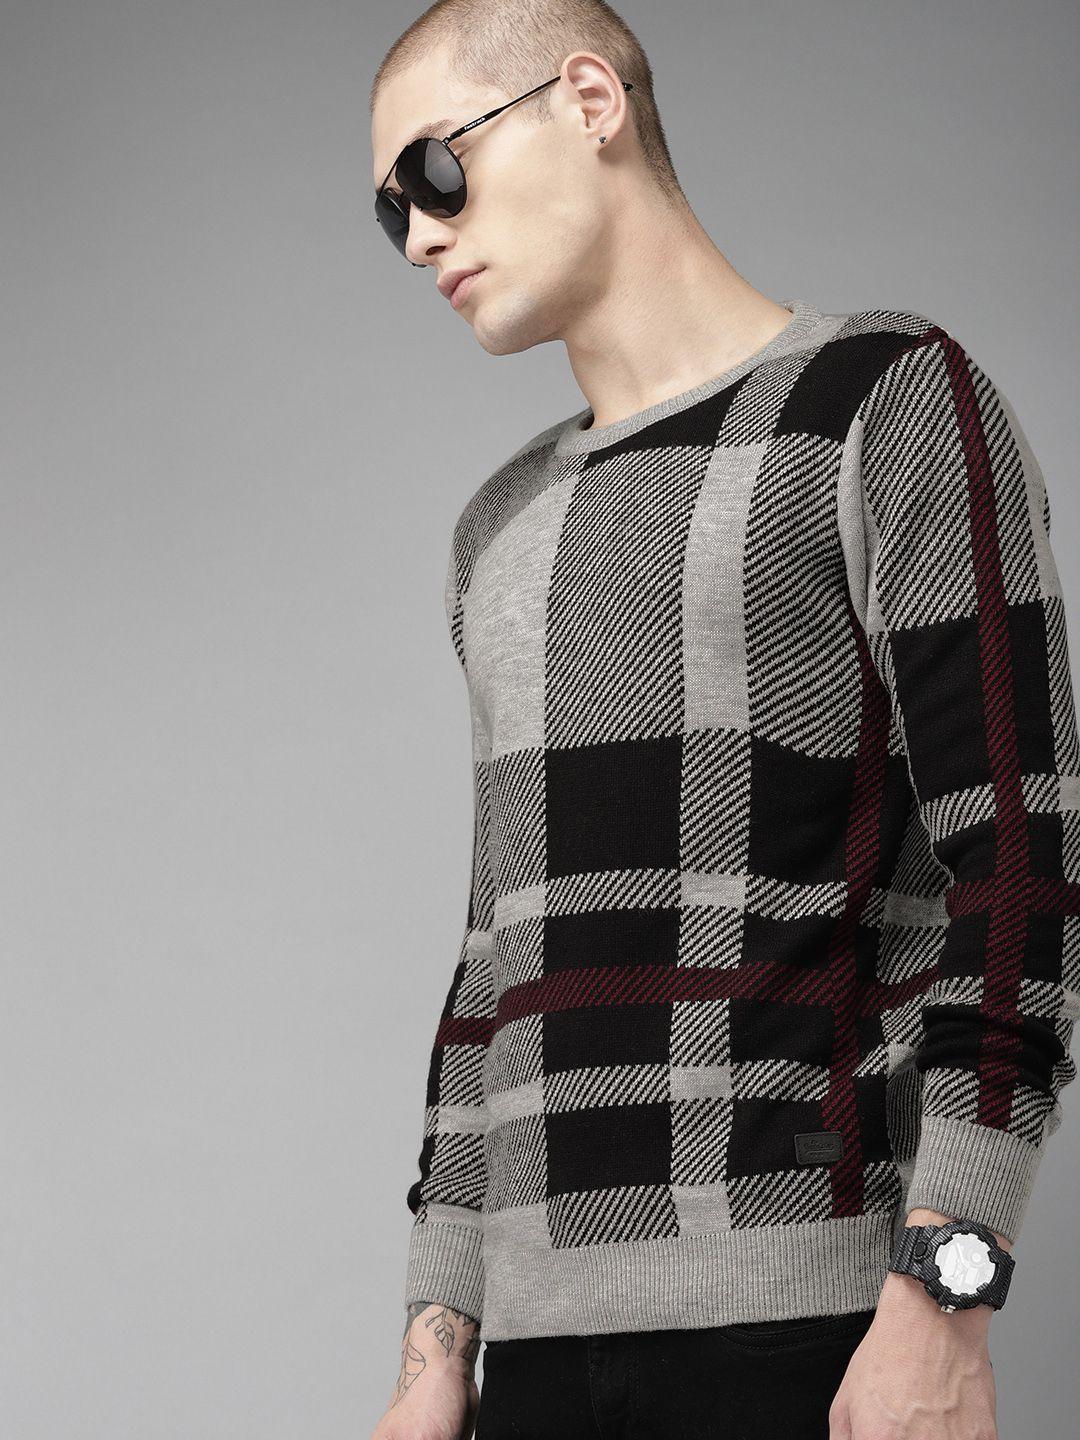 the roadster lifestyle co men grey melange & black checked pullover sweater